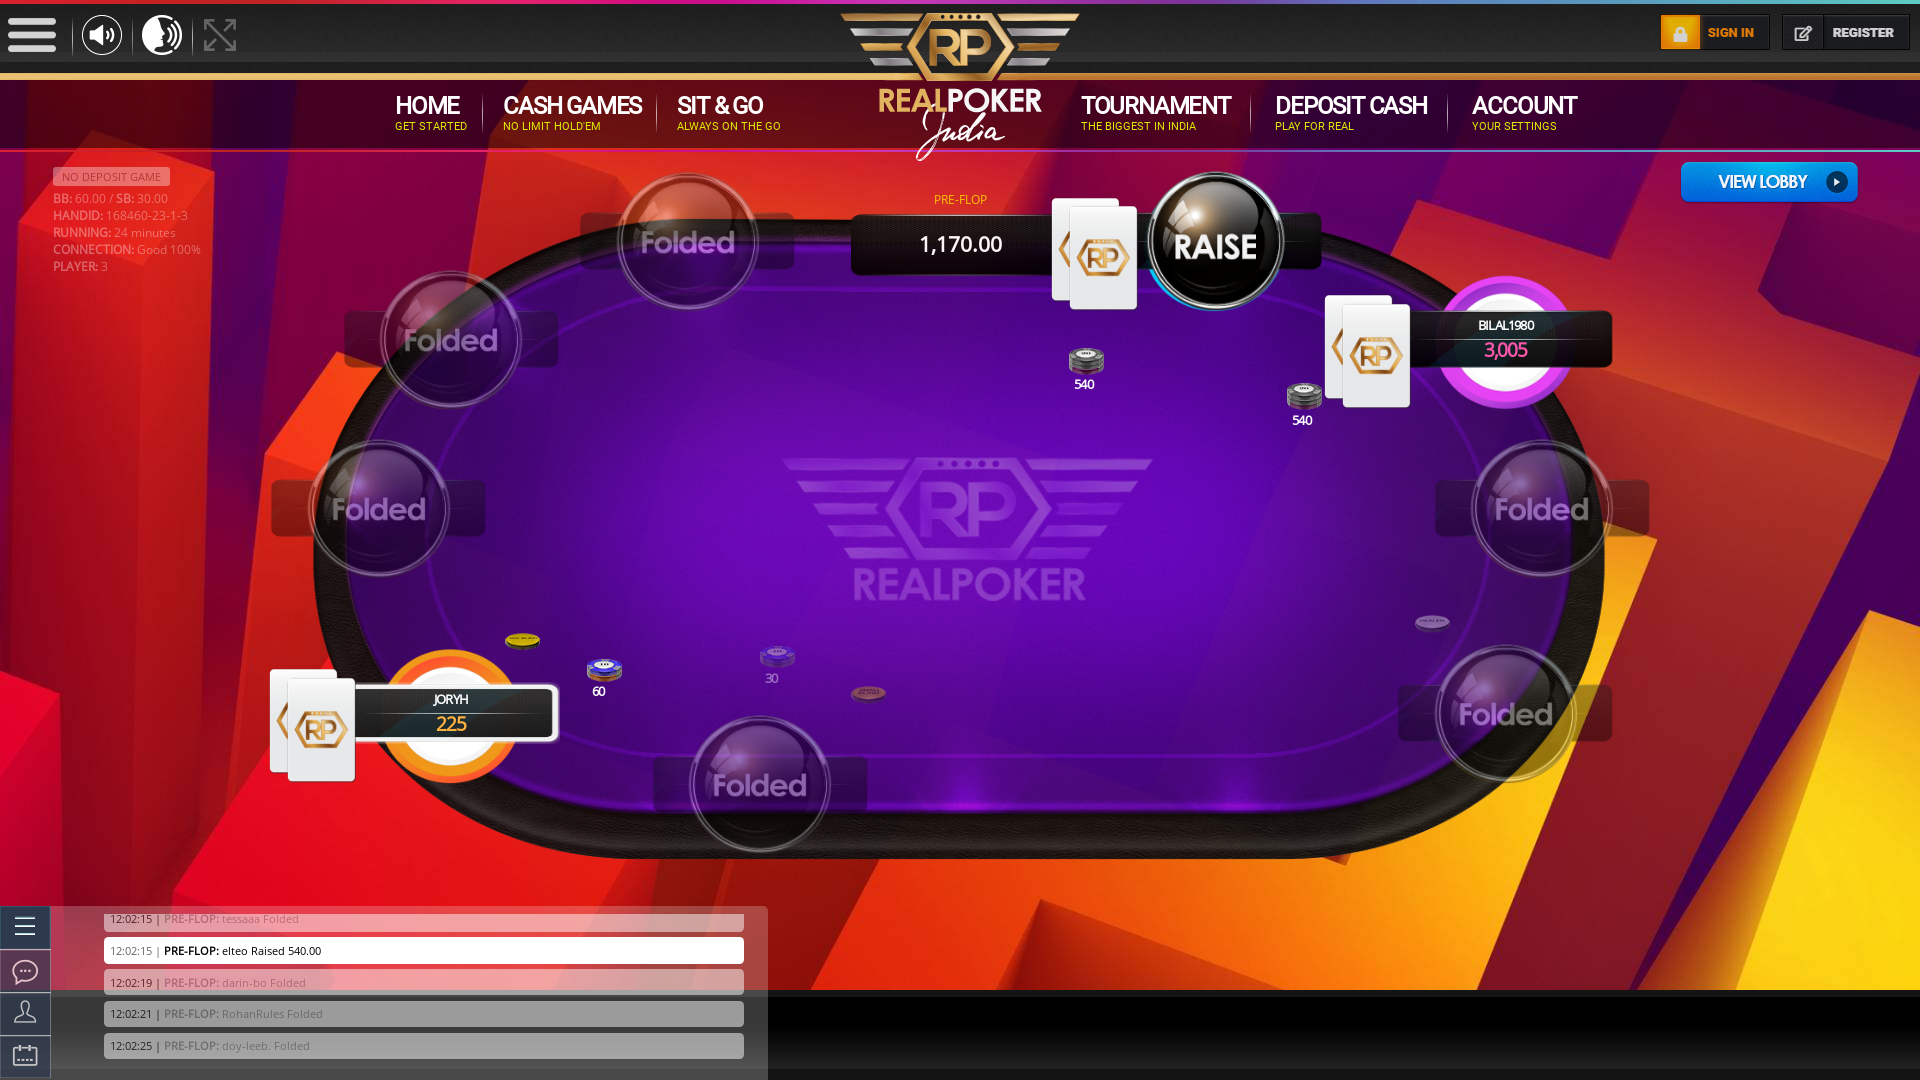 Real poker 10 player table in the 24th minute